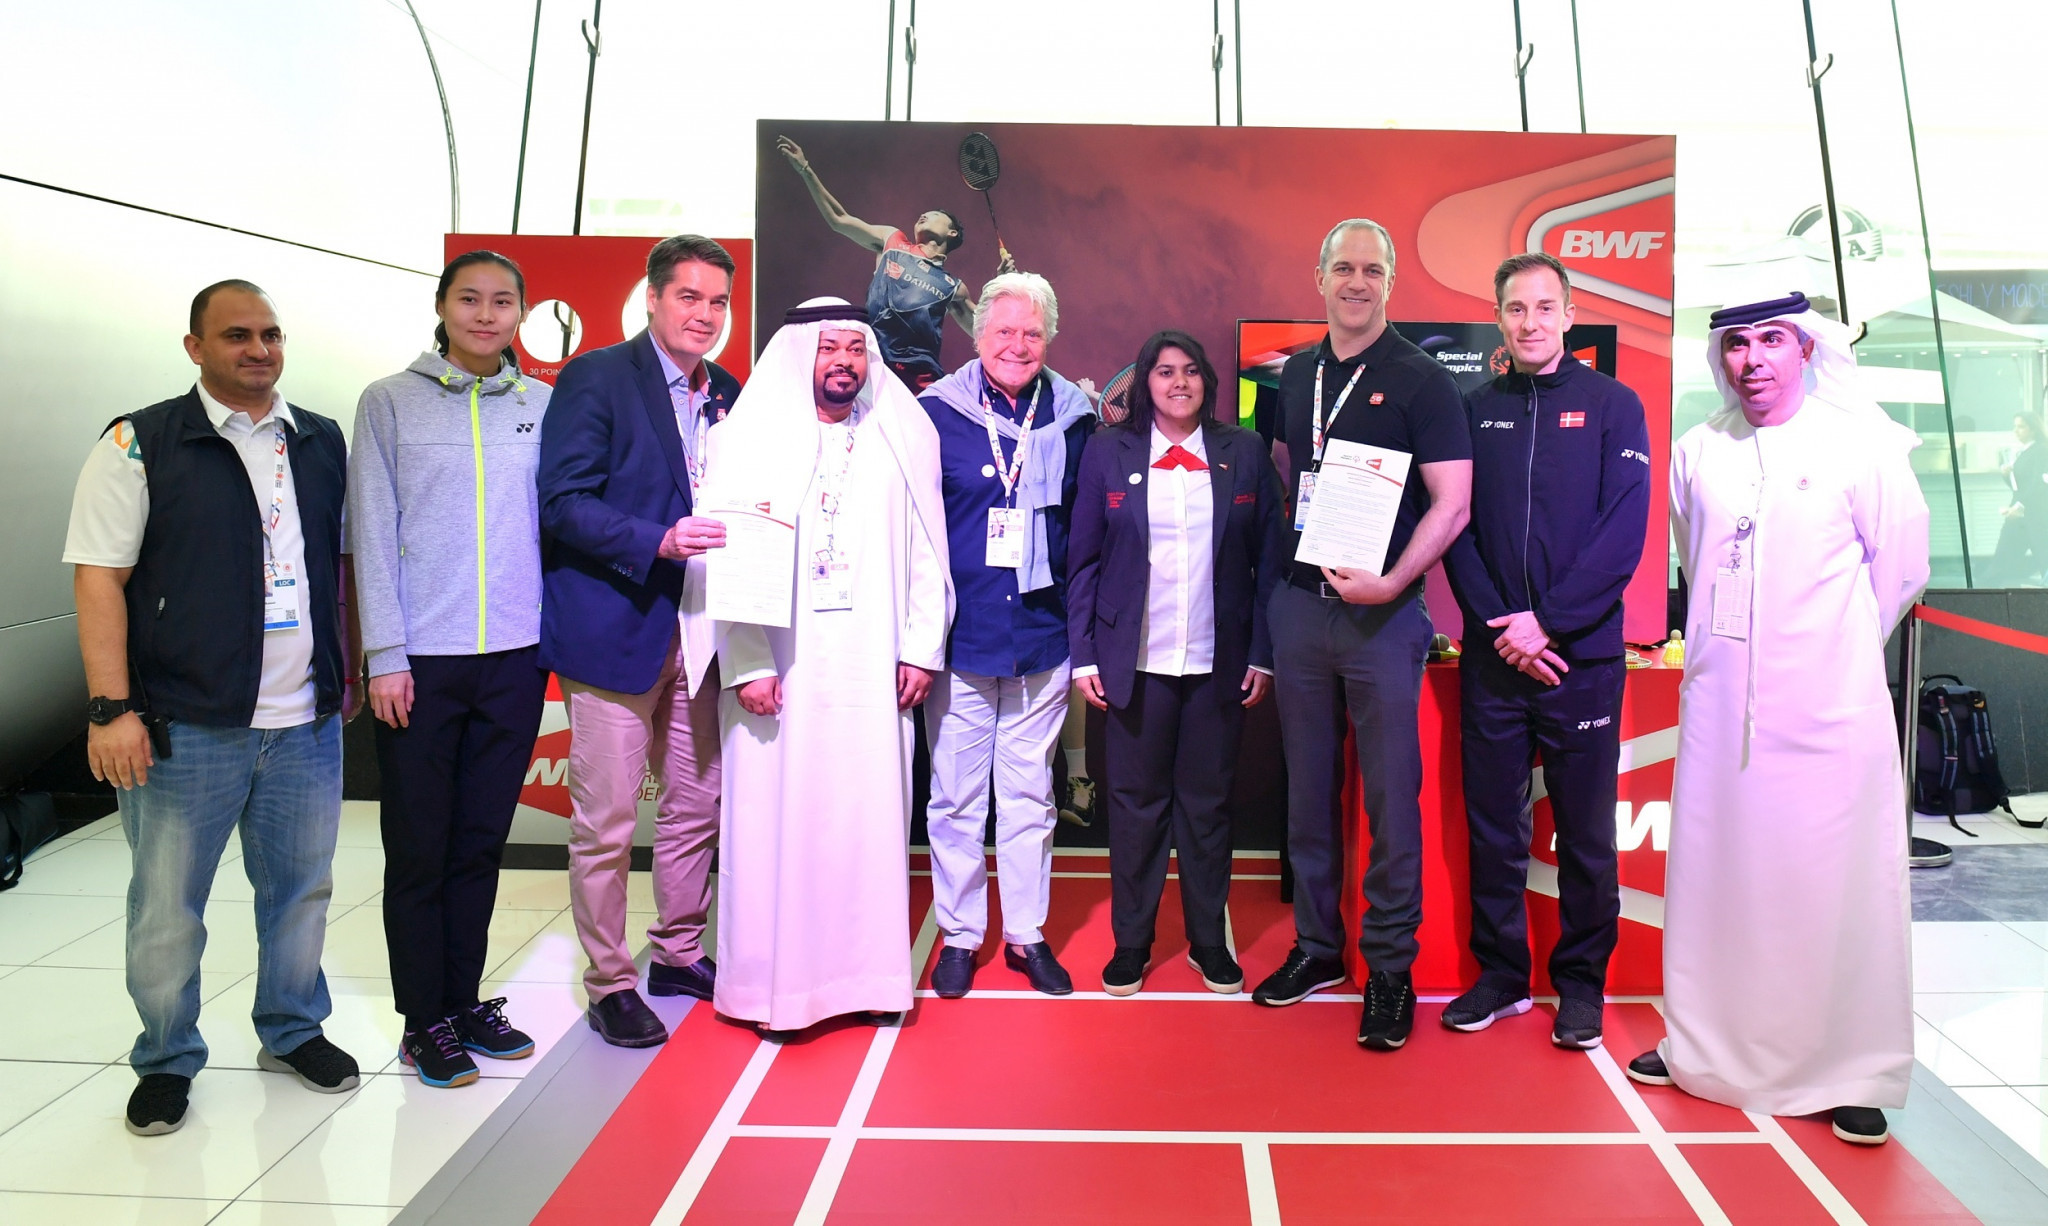 The Badminton World Federation and Special Olympics International have today signed a landmark Memorandum of Understanding ©BWF/James Varghese